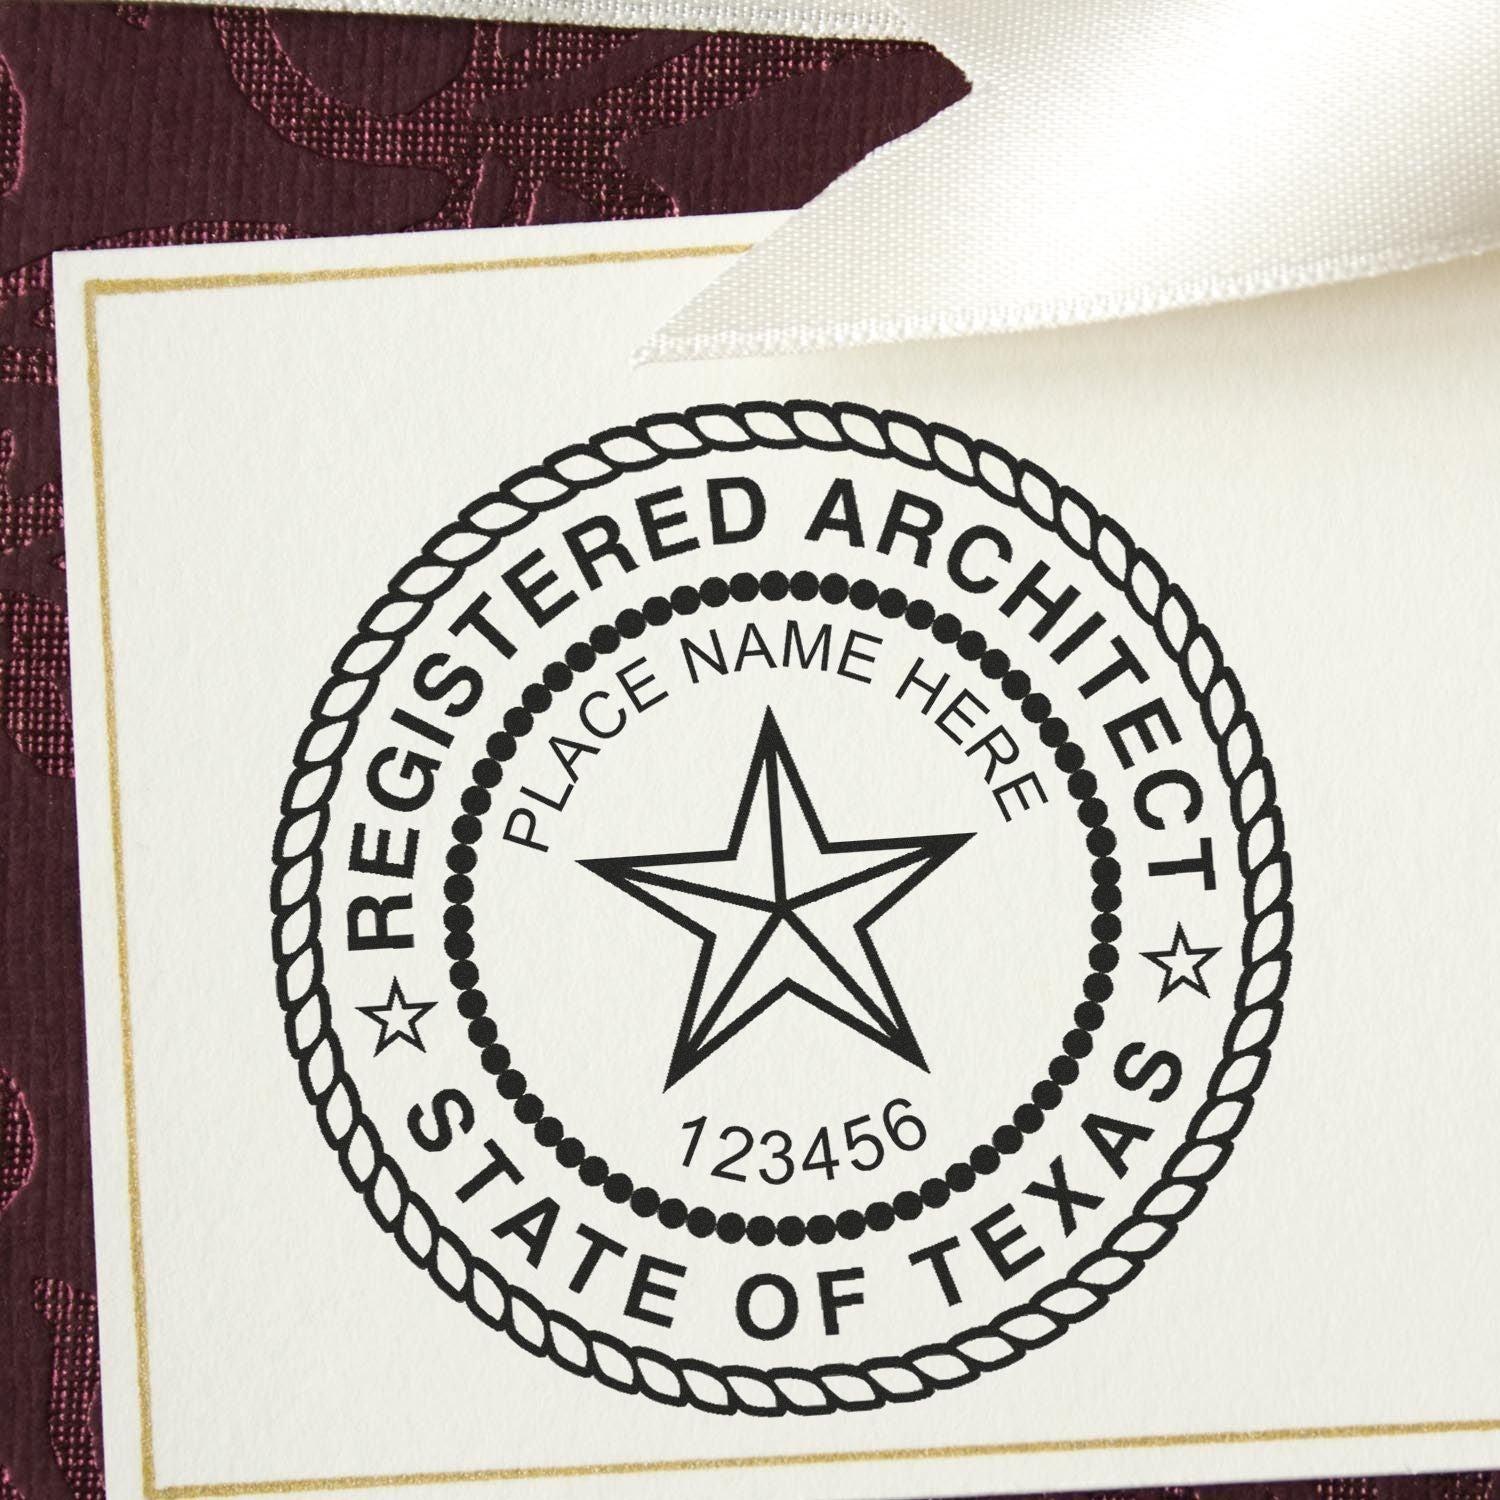 Achieving Professionalism: Complying with Texas Architect Stamp Guidelines Feature Image